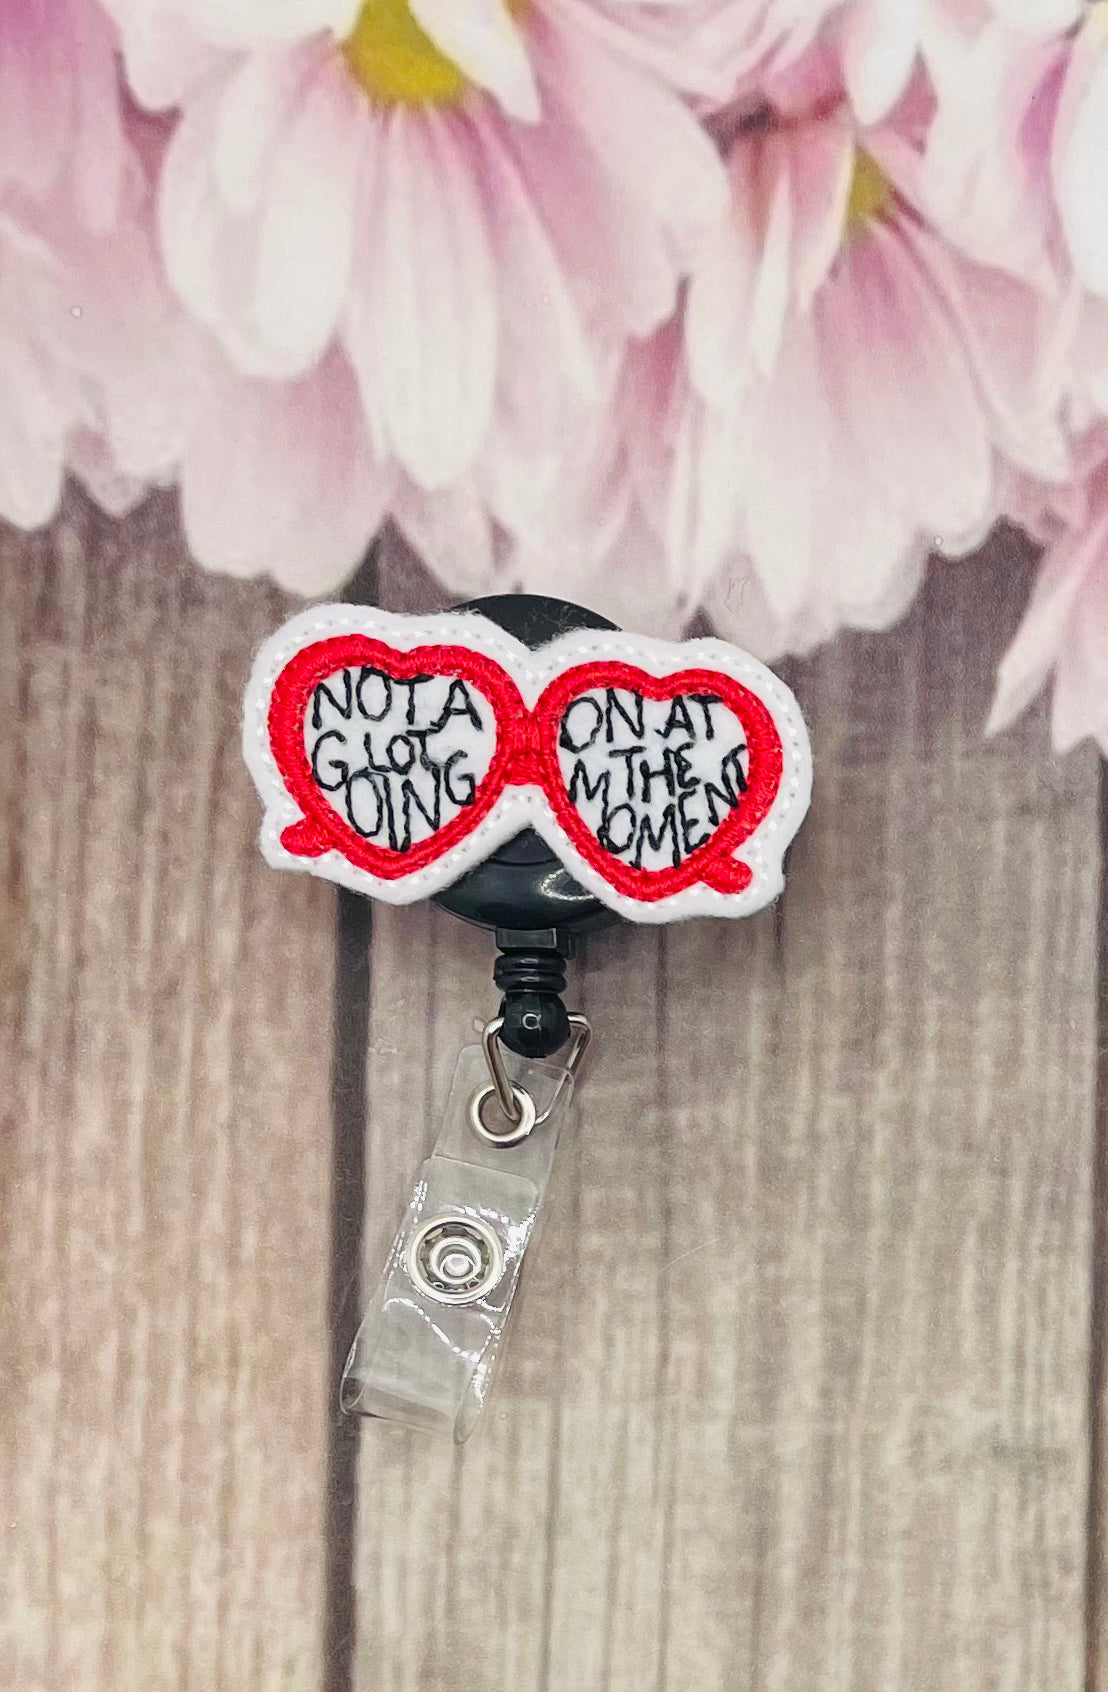 Taylor swift themed badge reels Not a lot going on